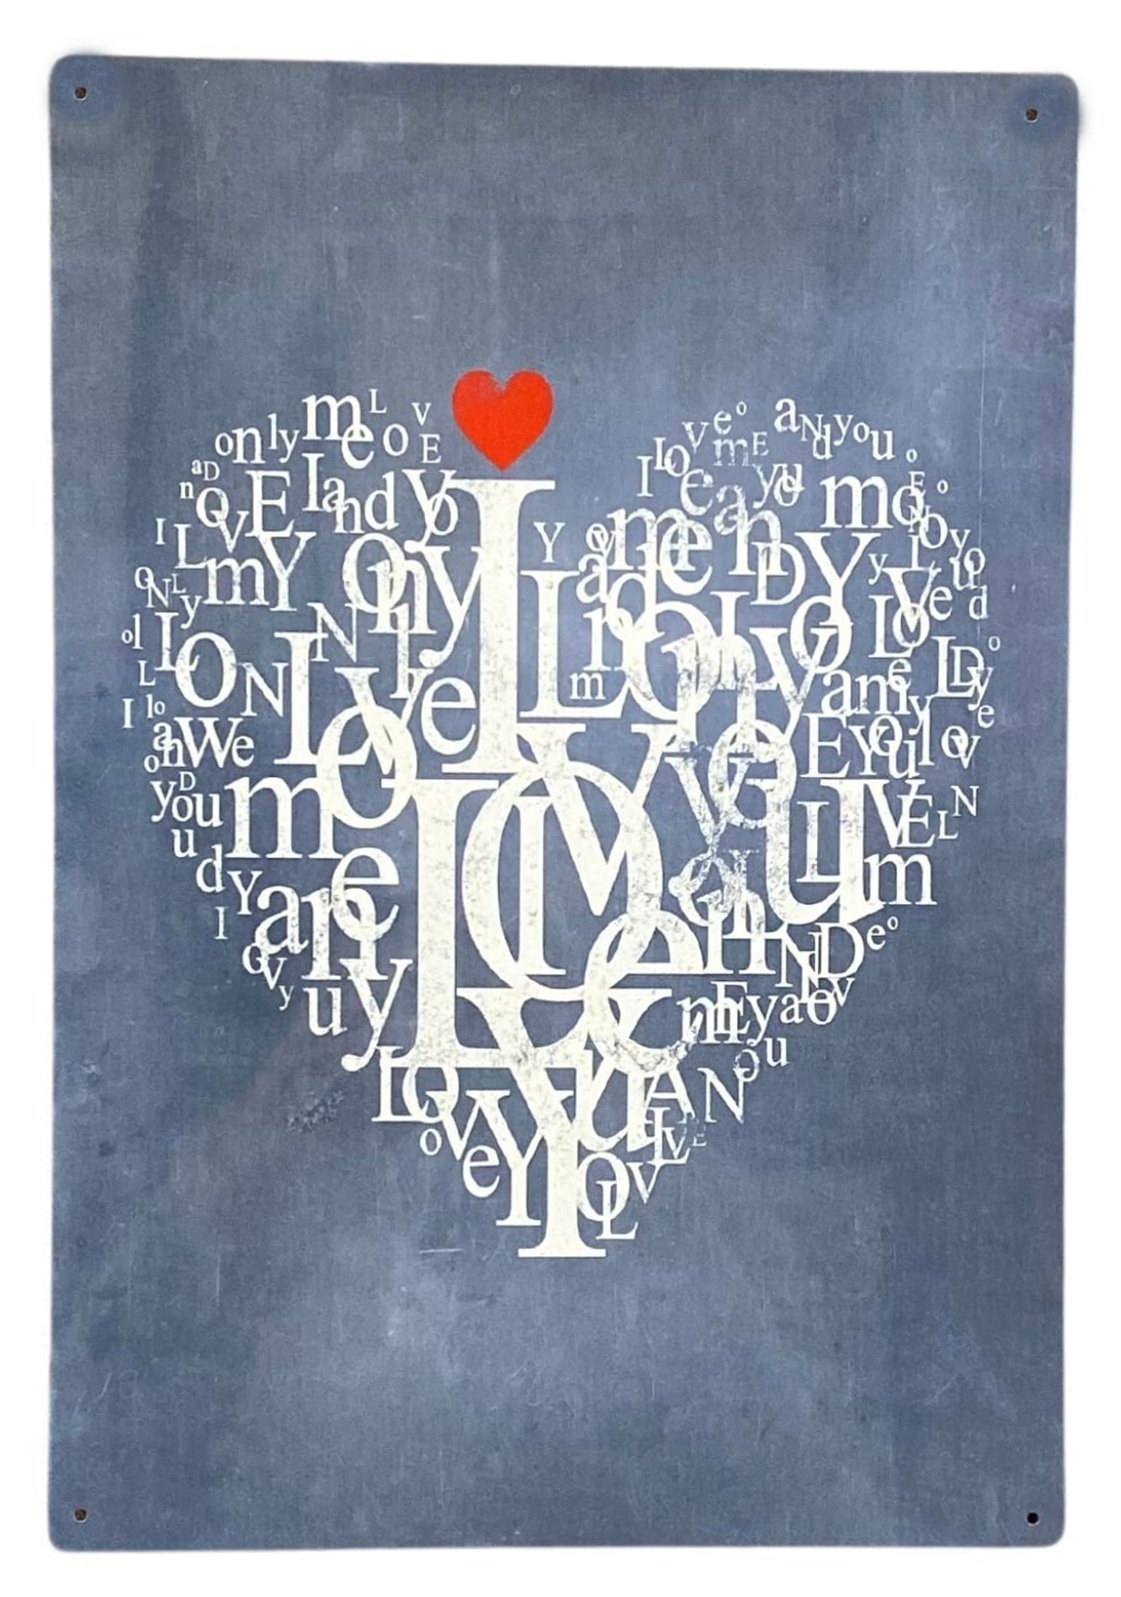 Metal Travel Wall Sign - Love Heart, Valentine